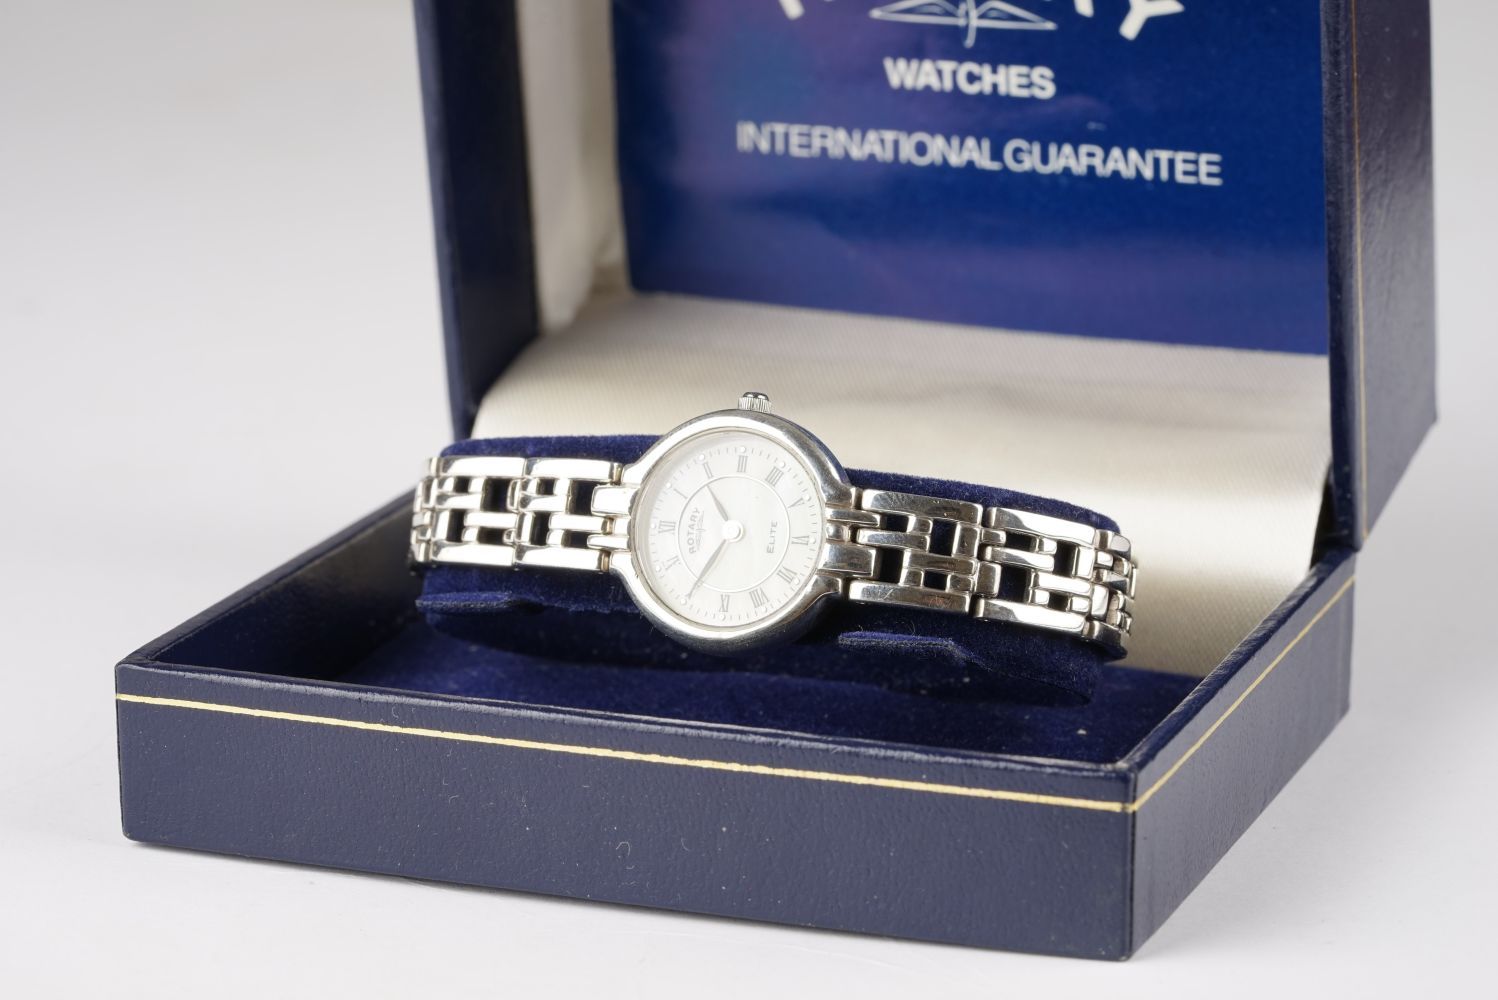 LADIES ROTARY ELITE STERLING SILVER WRISTWATCH W/ BOX & GUARANTEE, circular mother of pearl dial - Image 2 of 2